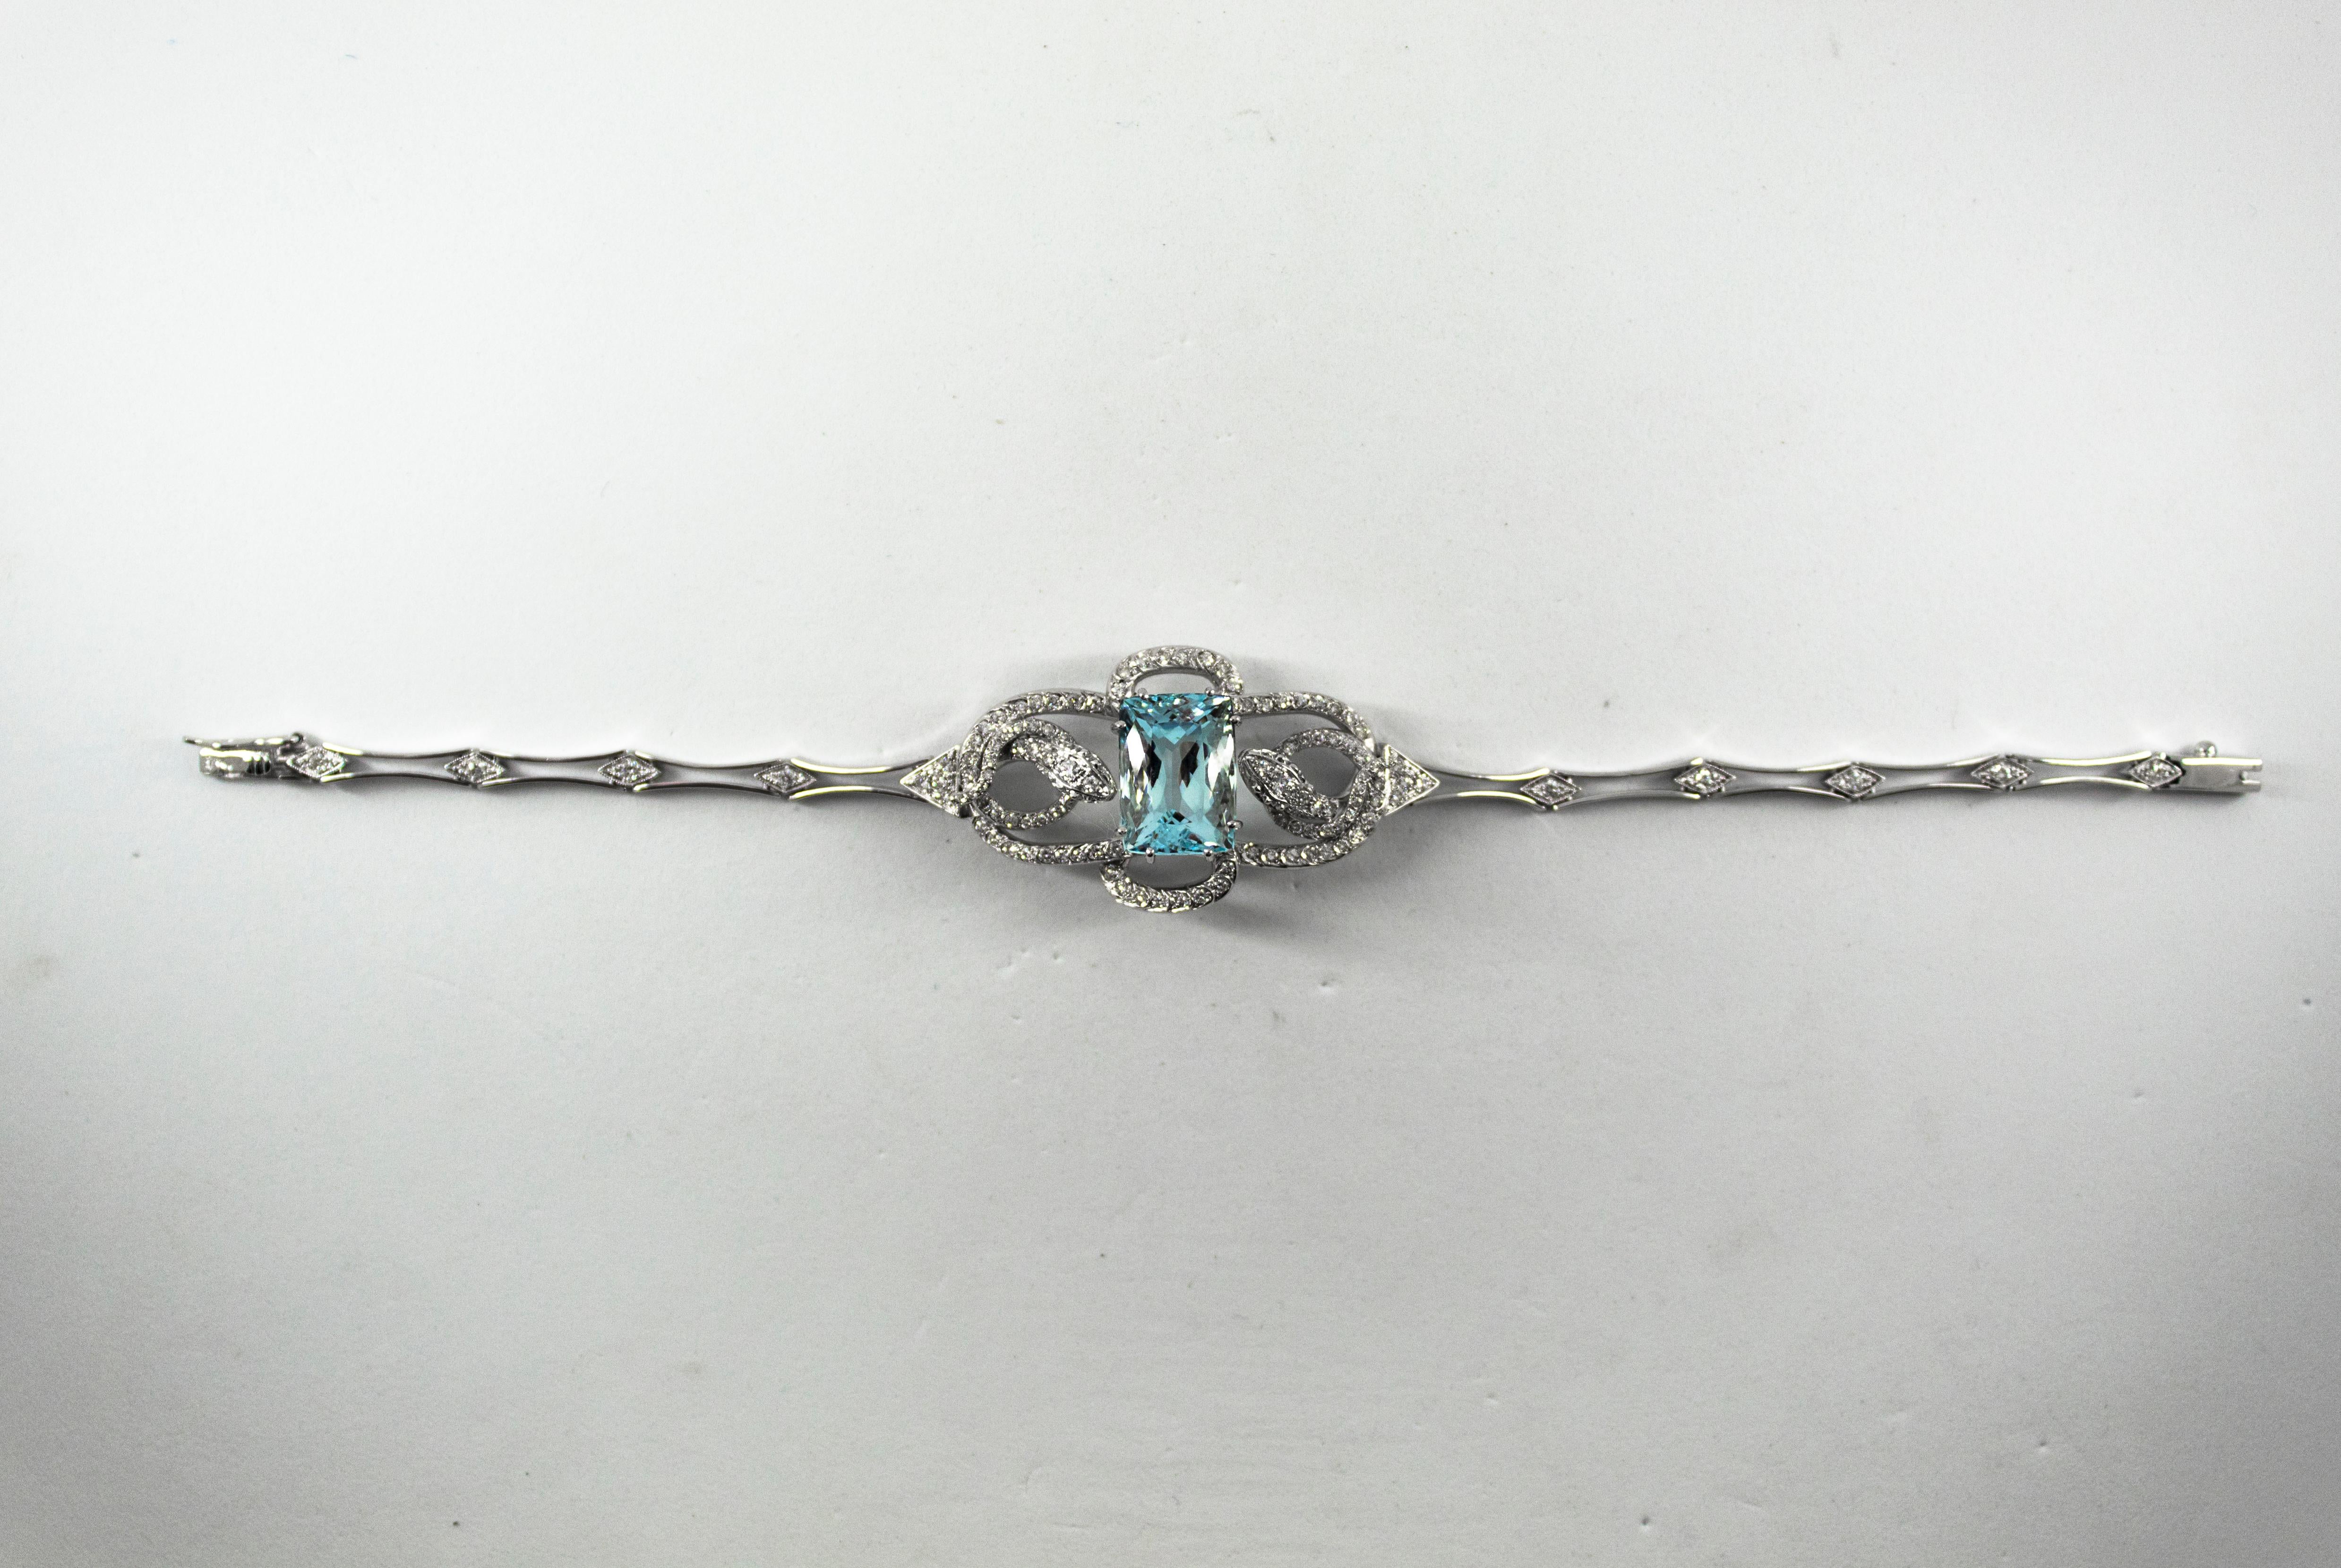 This Bracelet is made of 18K White Gold.
This Bracelet has 1.25 Carats of White Brilliant Cut Diamonds.
This Bracelet has an 8.60 Carats Natural Aquamarine.
This Bracelet is inspired by Art Nouveau.

We're a workshop so every piece is handmade,